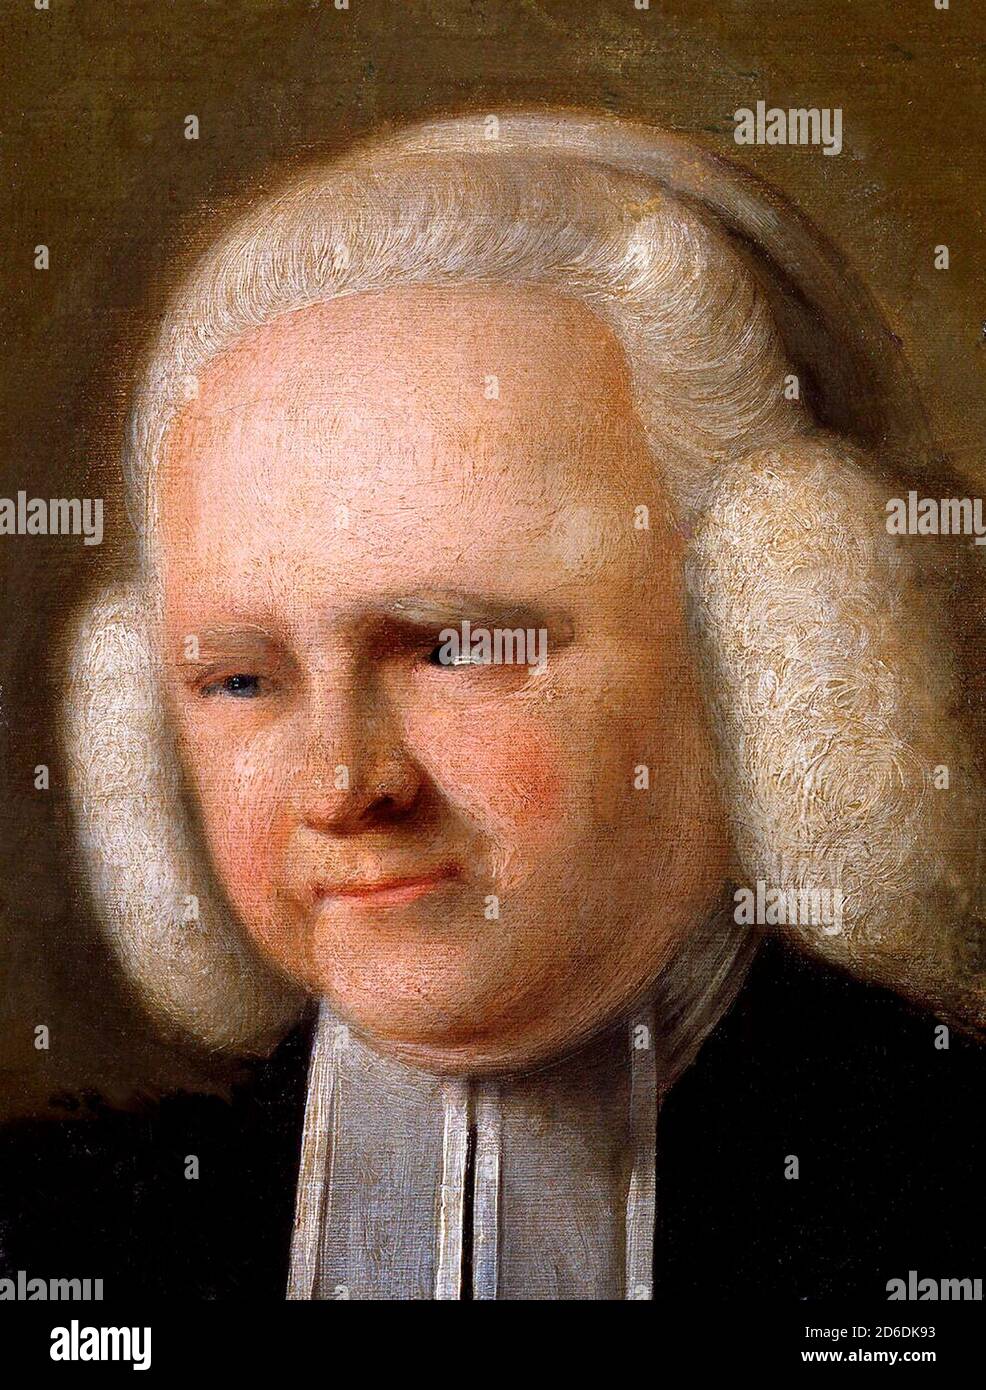 George Whitefield. Portrait of the English Anglican cleric, Reverend George Whitefield (1714-1770), John Russell, 1770. Whitefield was one of the founders of Methodism and the evangelical movement. Stock Photo